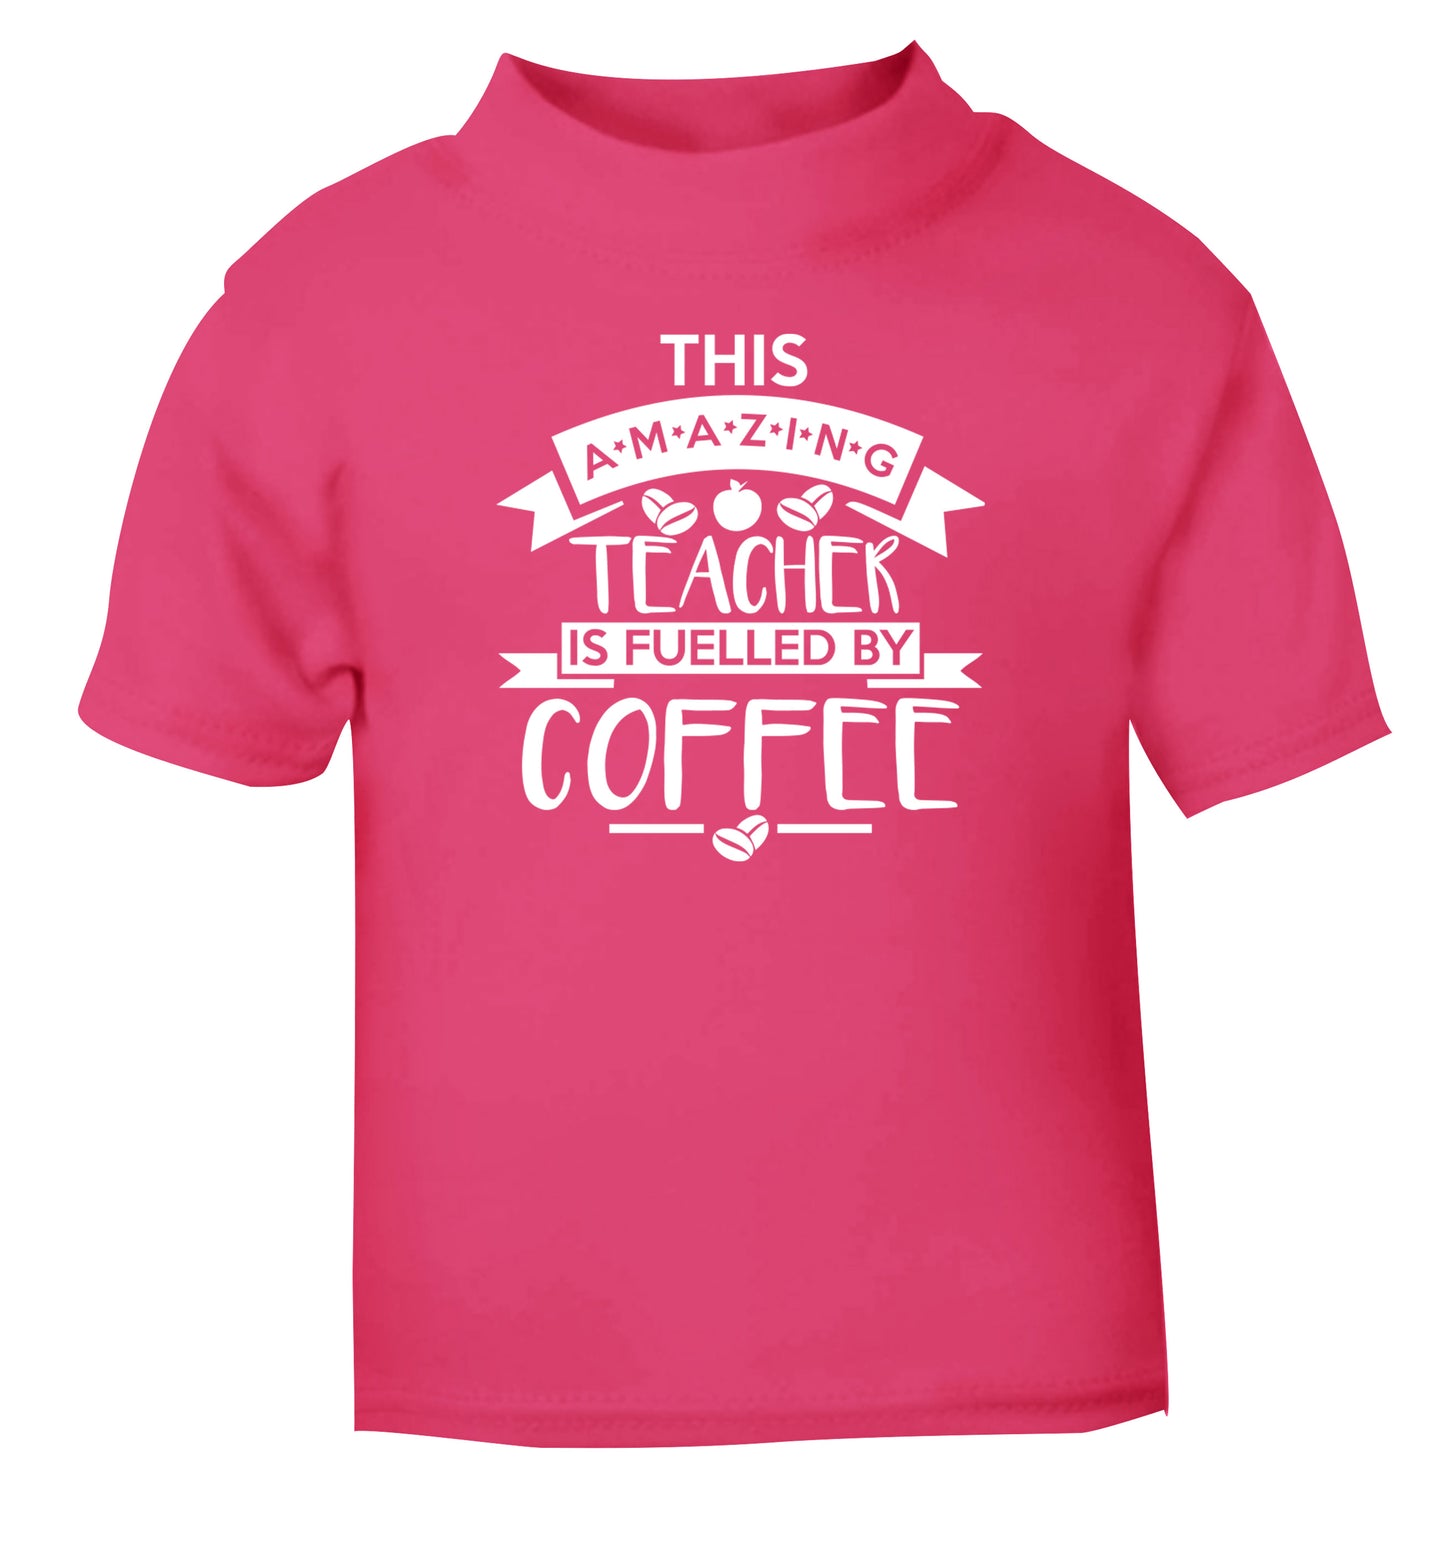 This amazing teacher is fuelled by coffee pink Baby Toddler Tshirt 2 Years